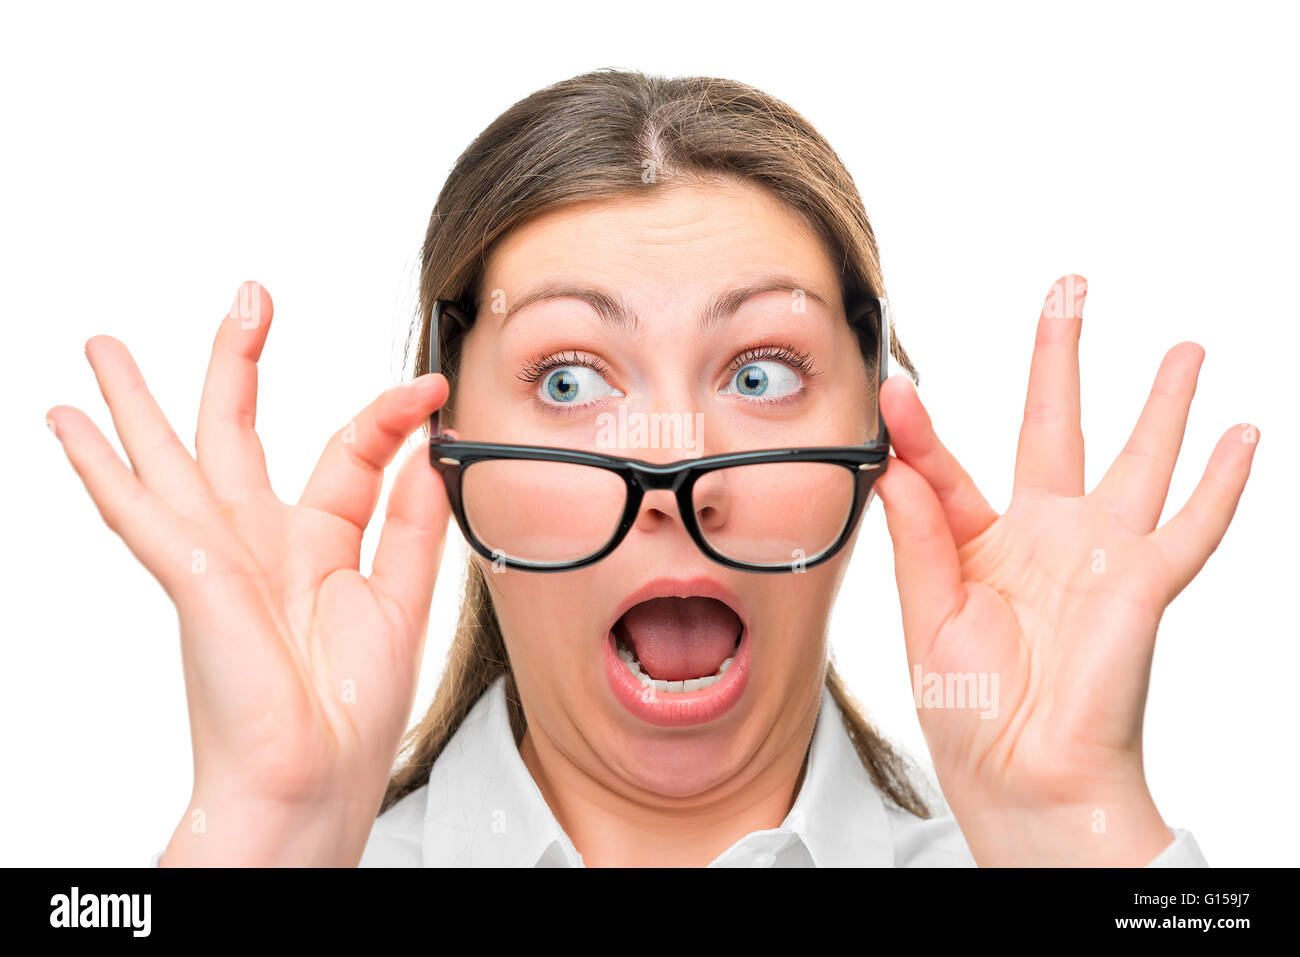 greatly shocked woman with glasses face close-up Stock Photo